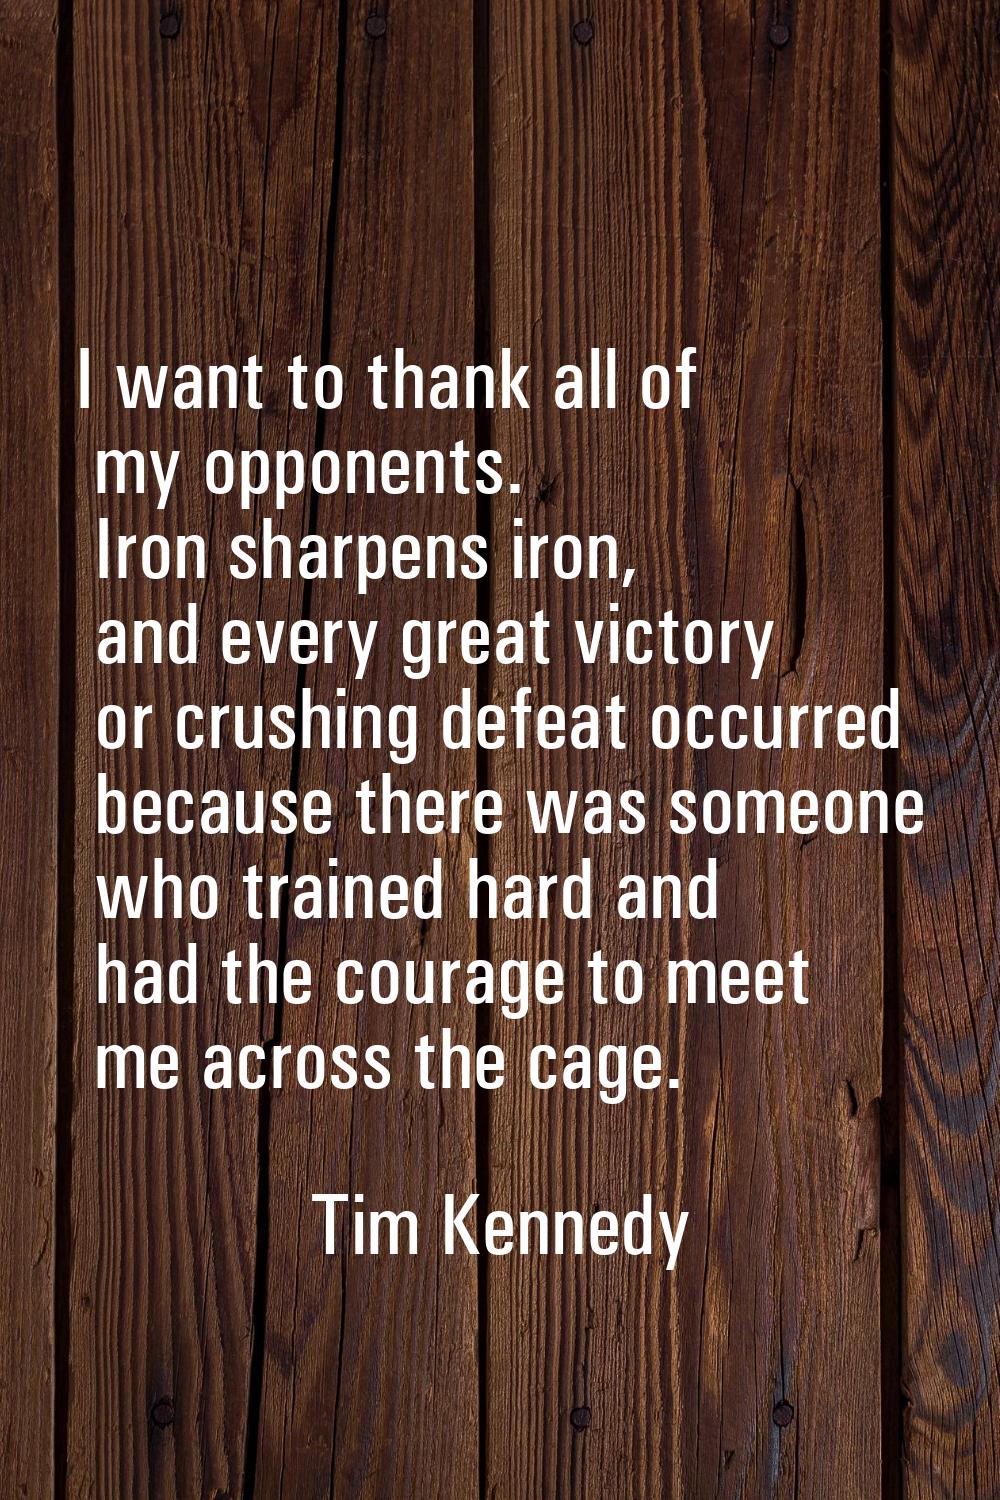 I want to thank all of my opponents. Iron sharpens iron, and every great victory or crushing defeat